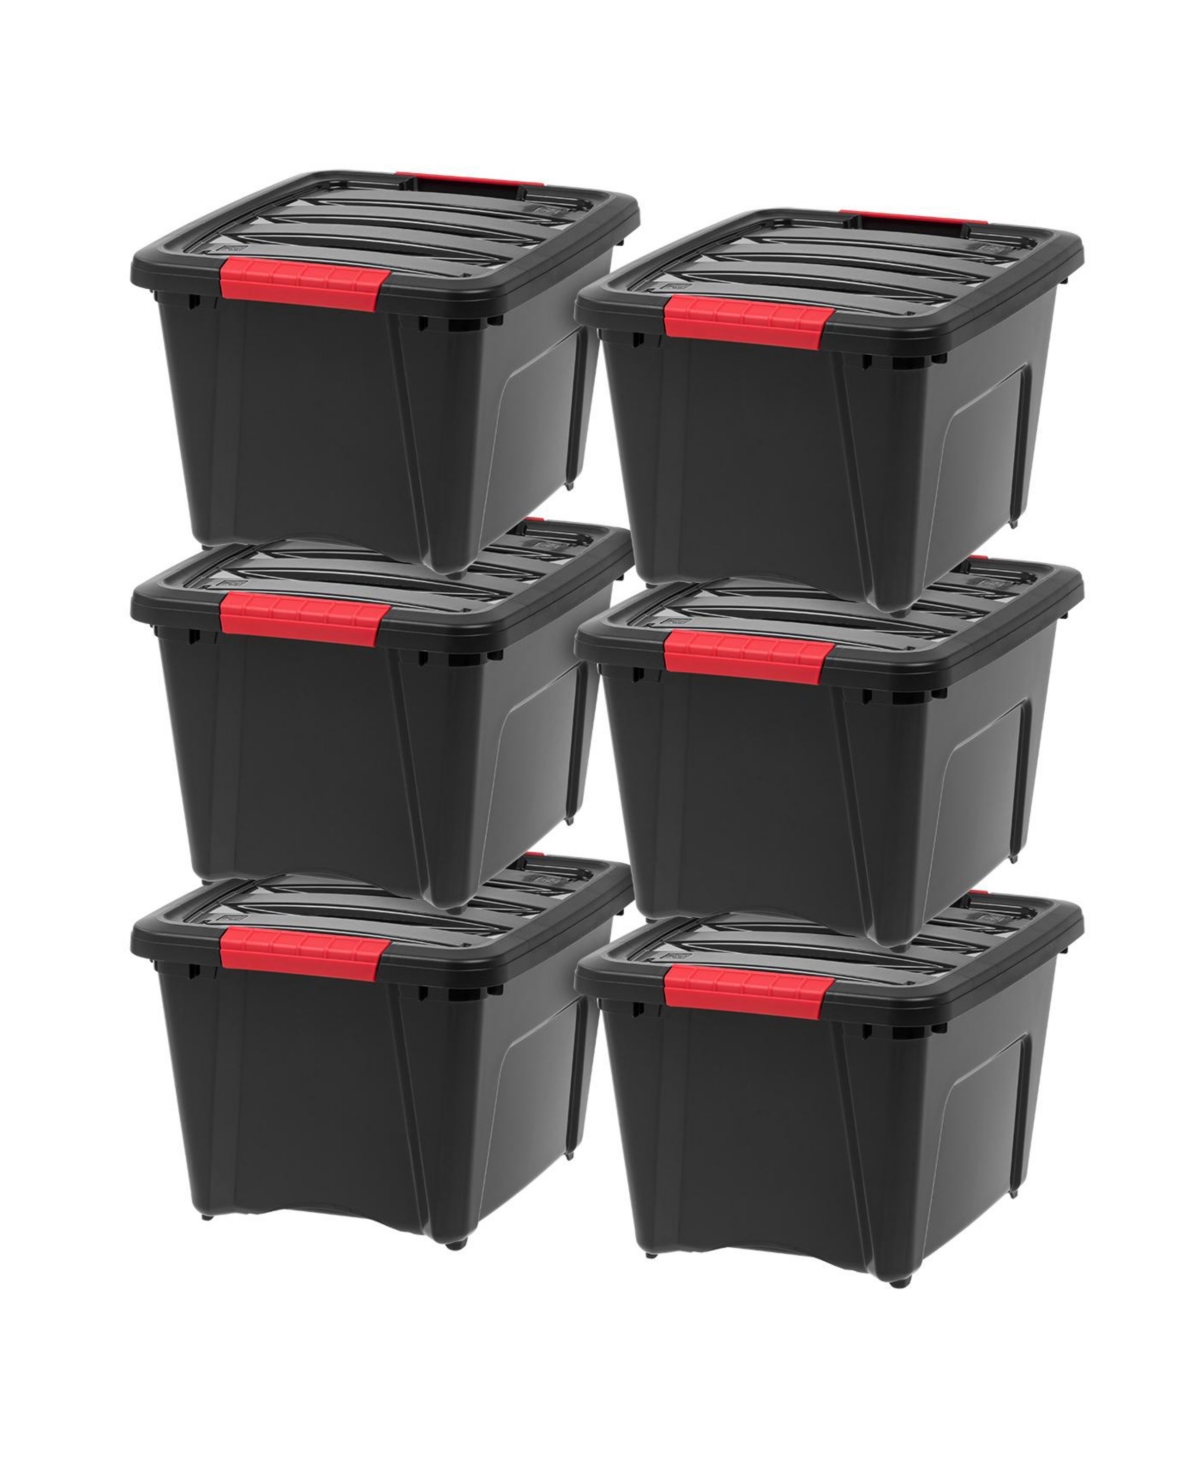 19 Qt Stackable Plastic Storage Bins with Lids, 6 Pack - Bpa-Free, Made in Usa - Garage Organizing Solution, Latches, Durable Nestable Contai